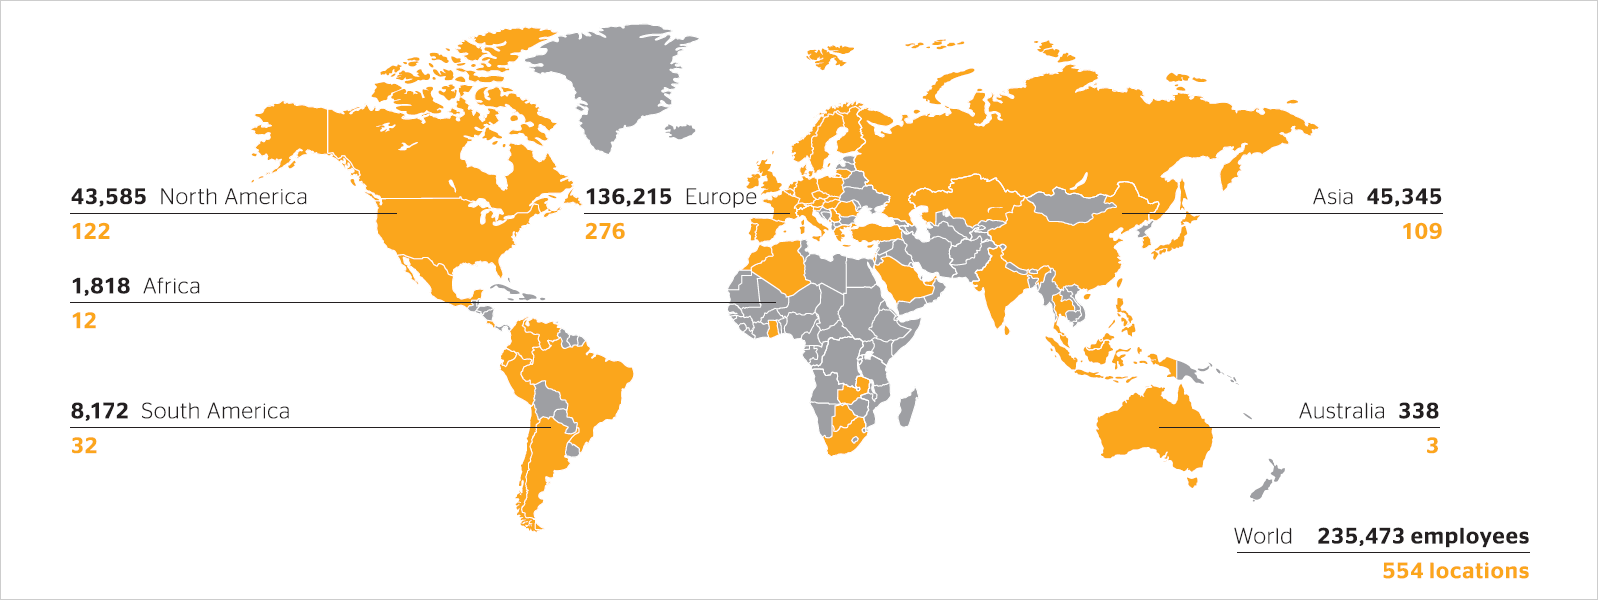 554 locations in 61 countries